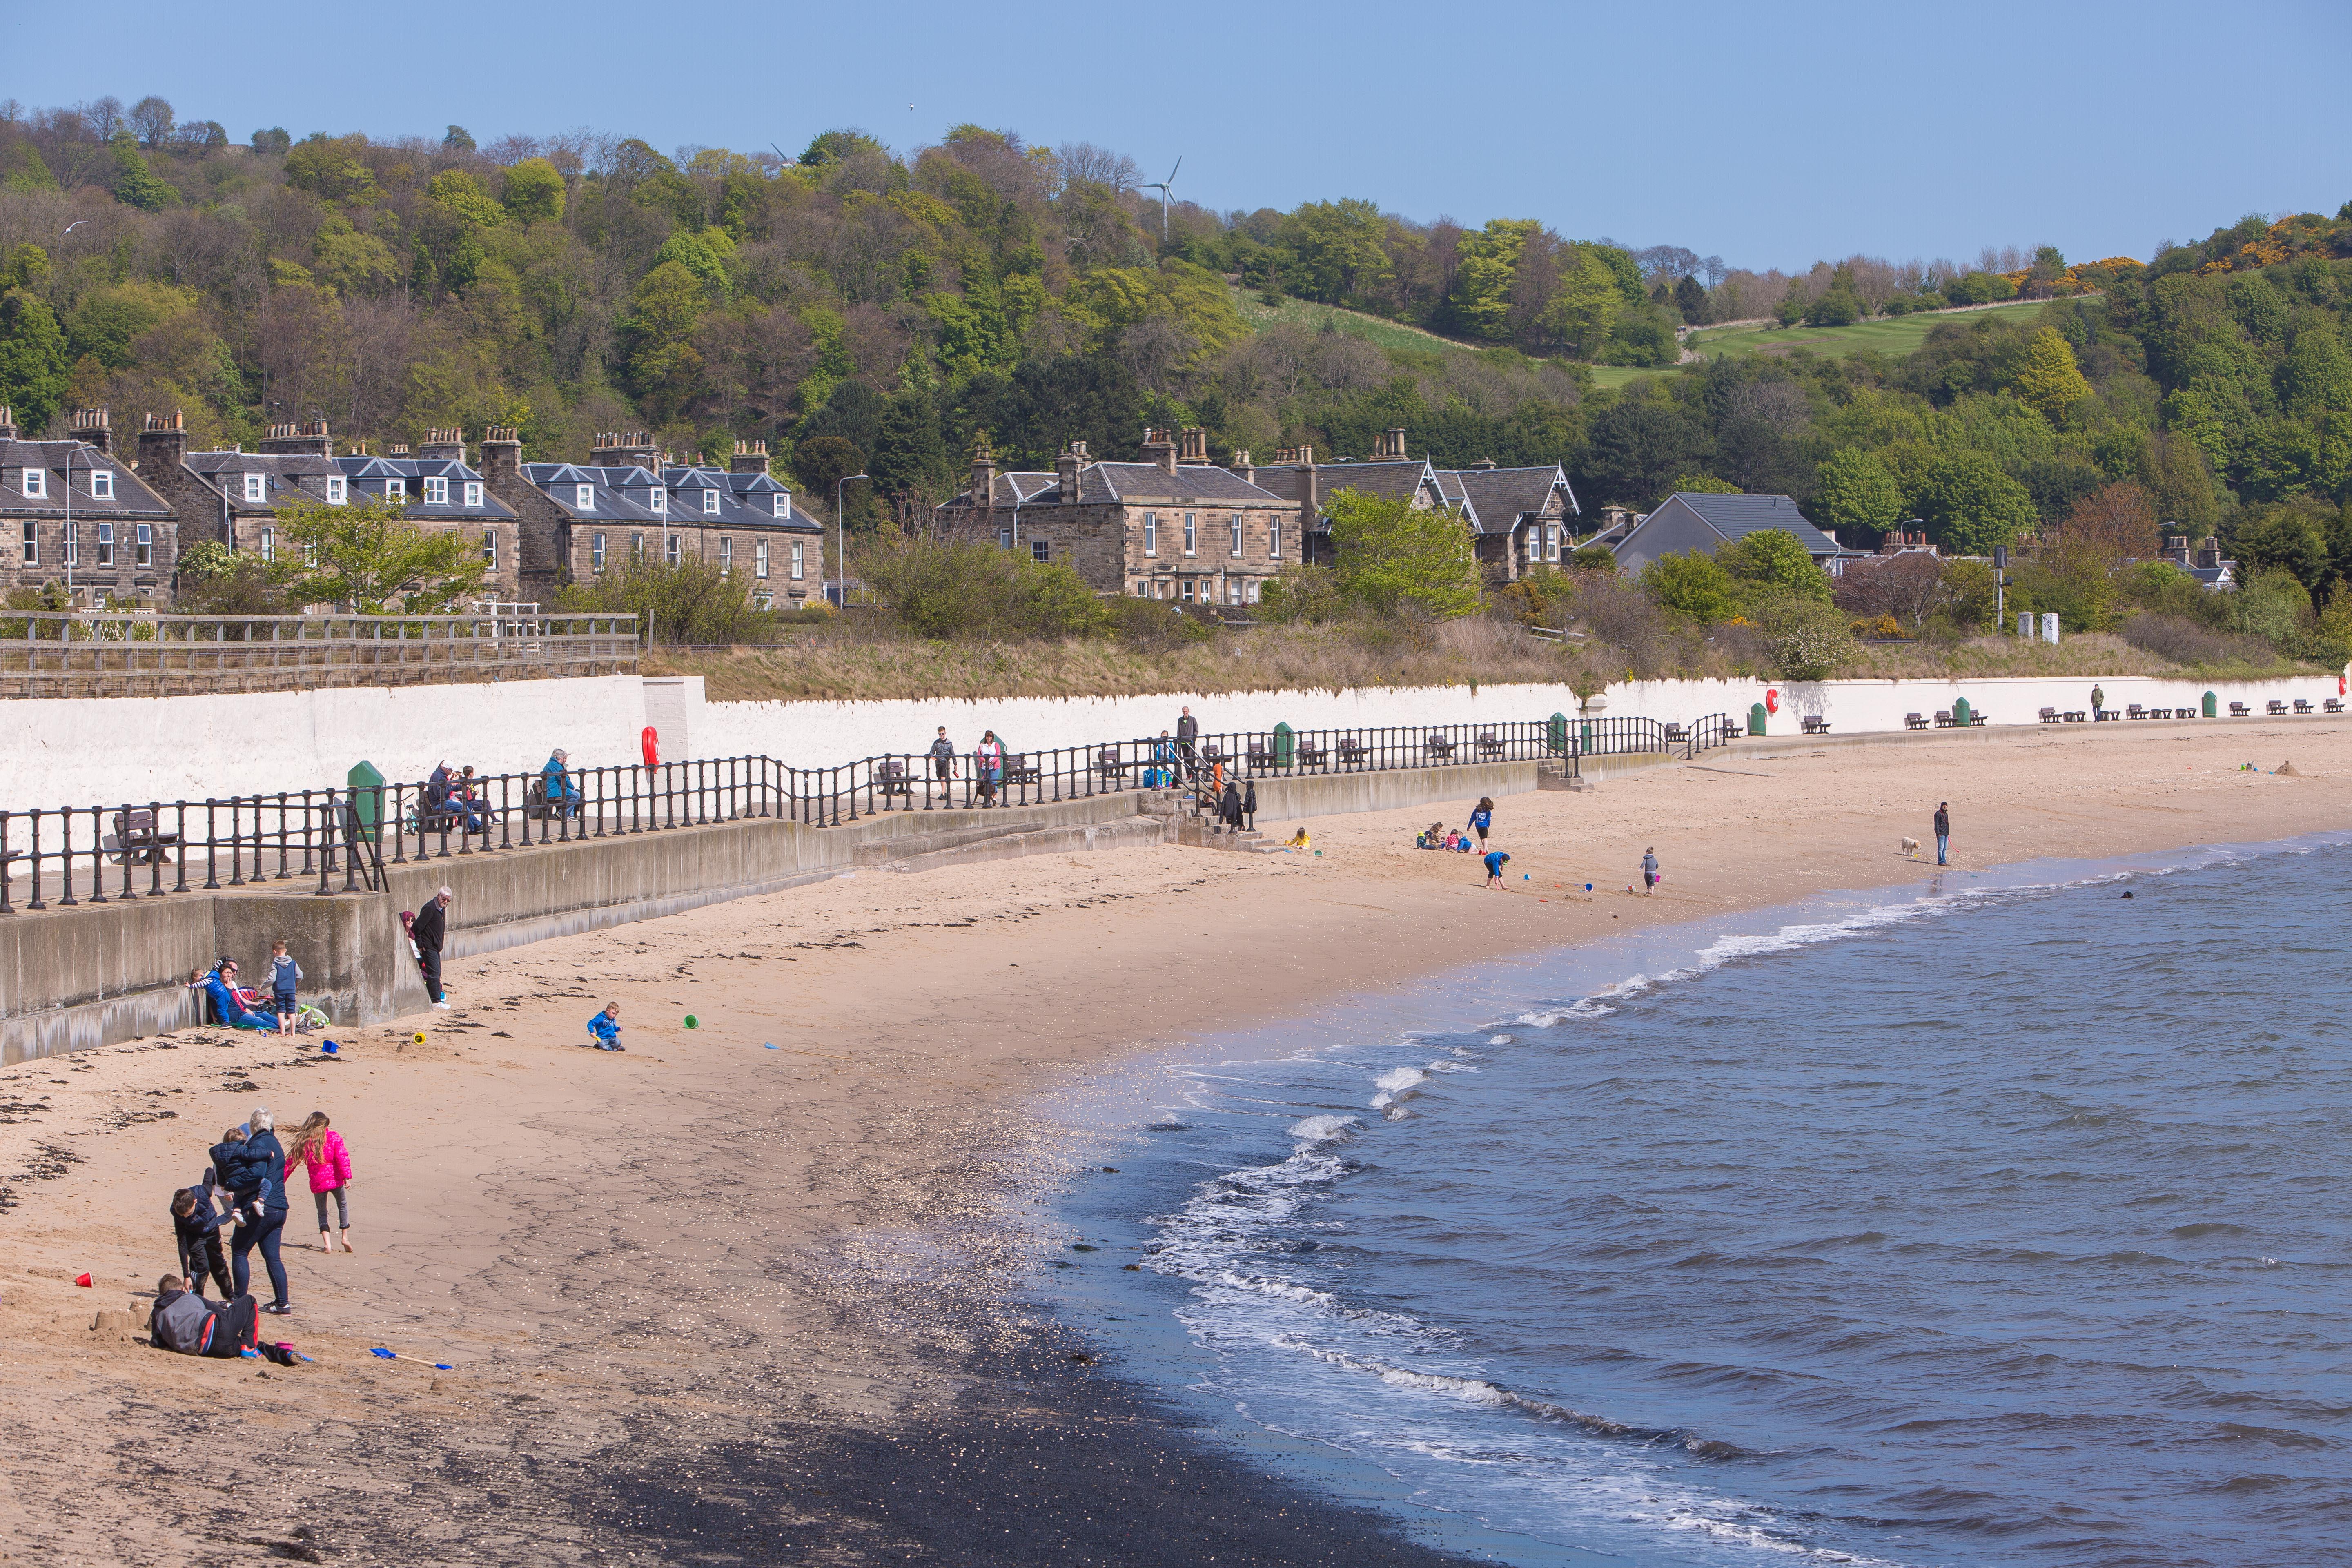 Cruise ship passengers could come ashore at Burntisland